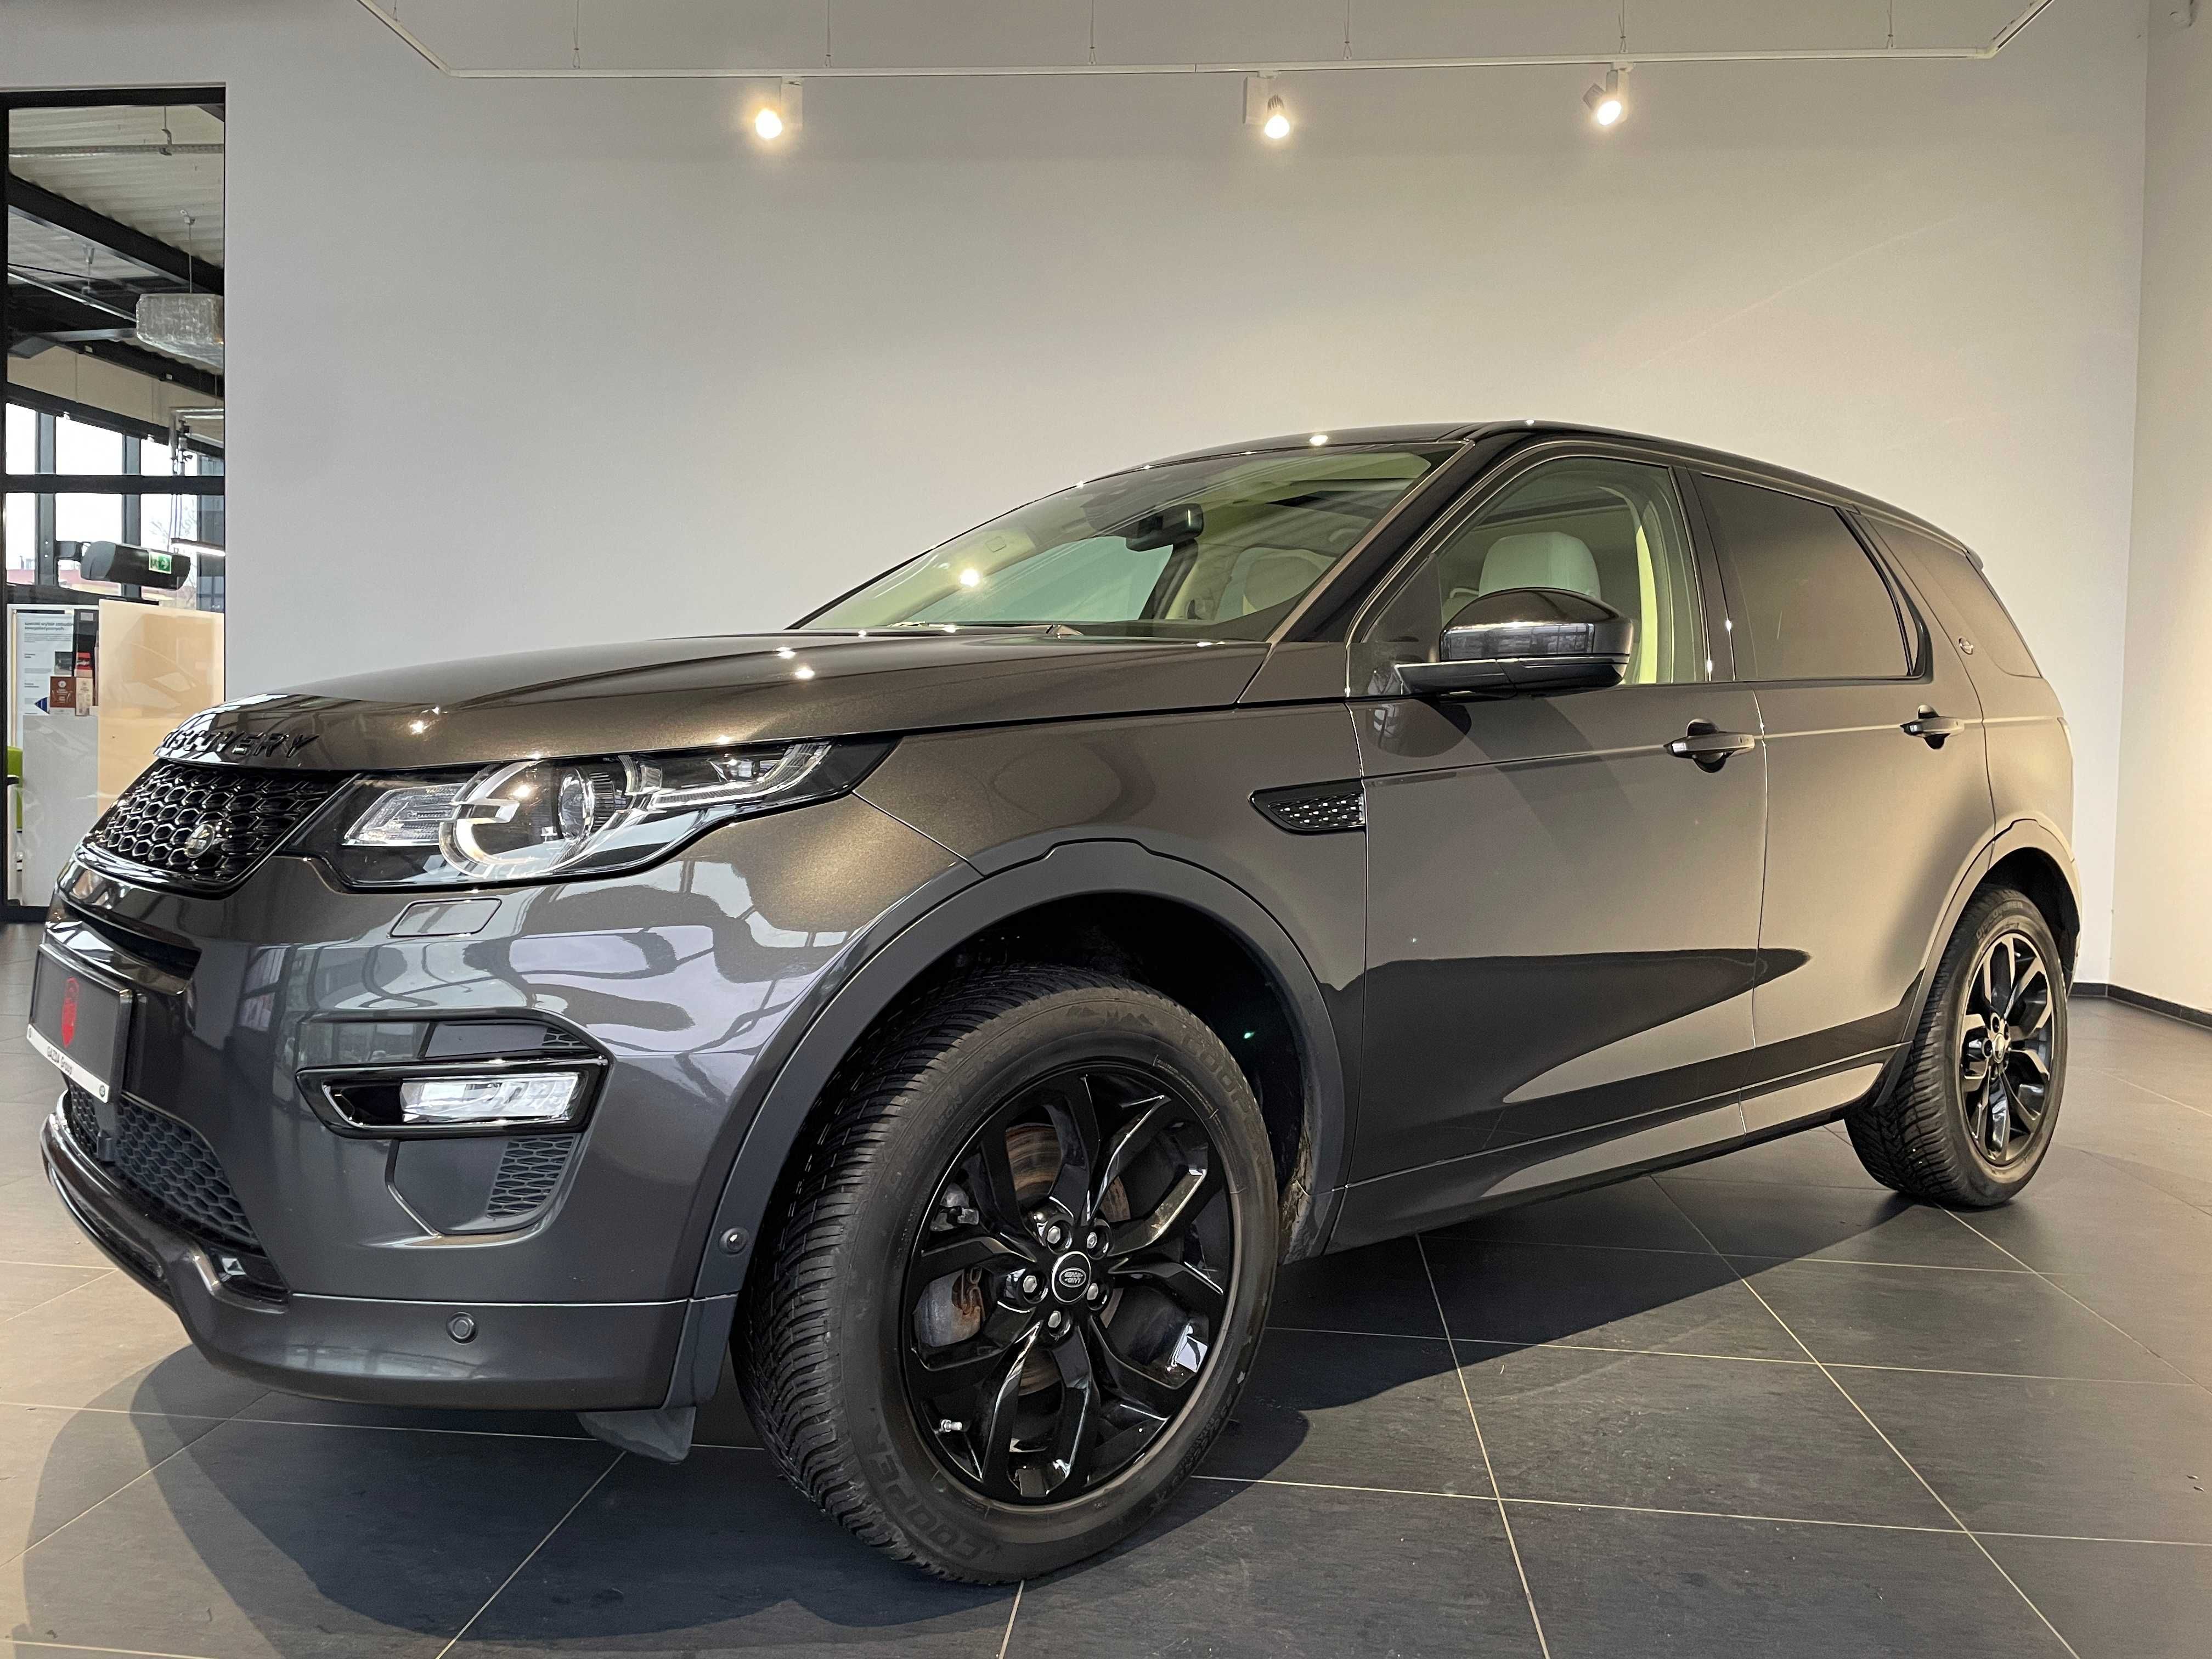 Land Rover Discovery Sport HSE Luxury 2.0 benzyna, 240KM, 2019r.